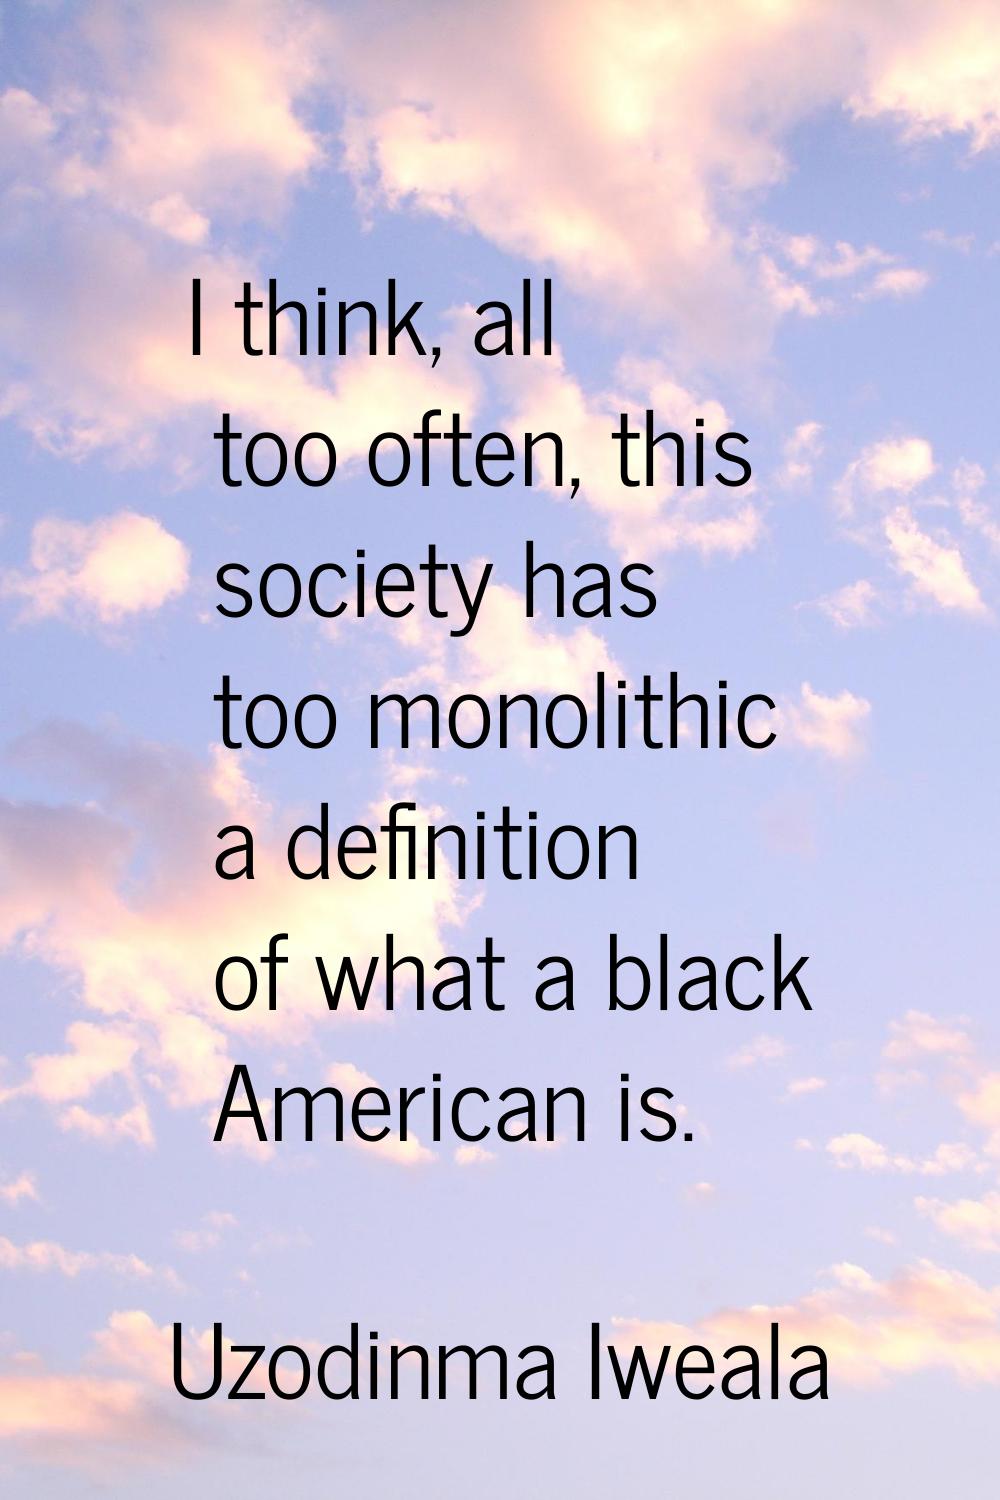 I think, all too often, this society has too monolithic a definition of what a black American is.